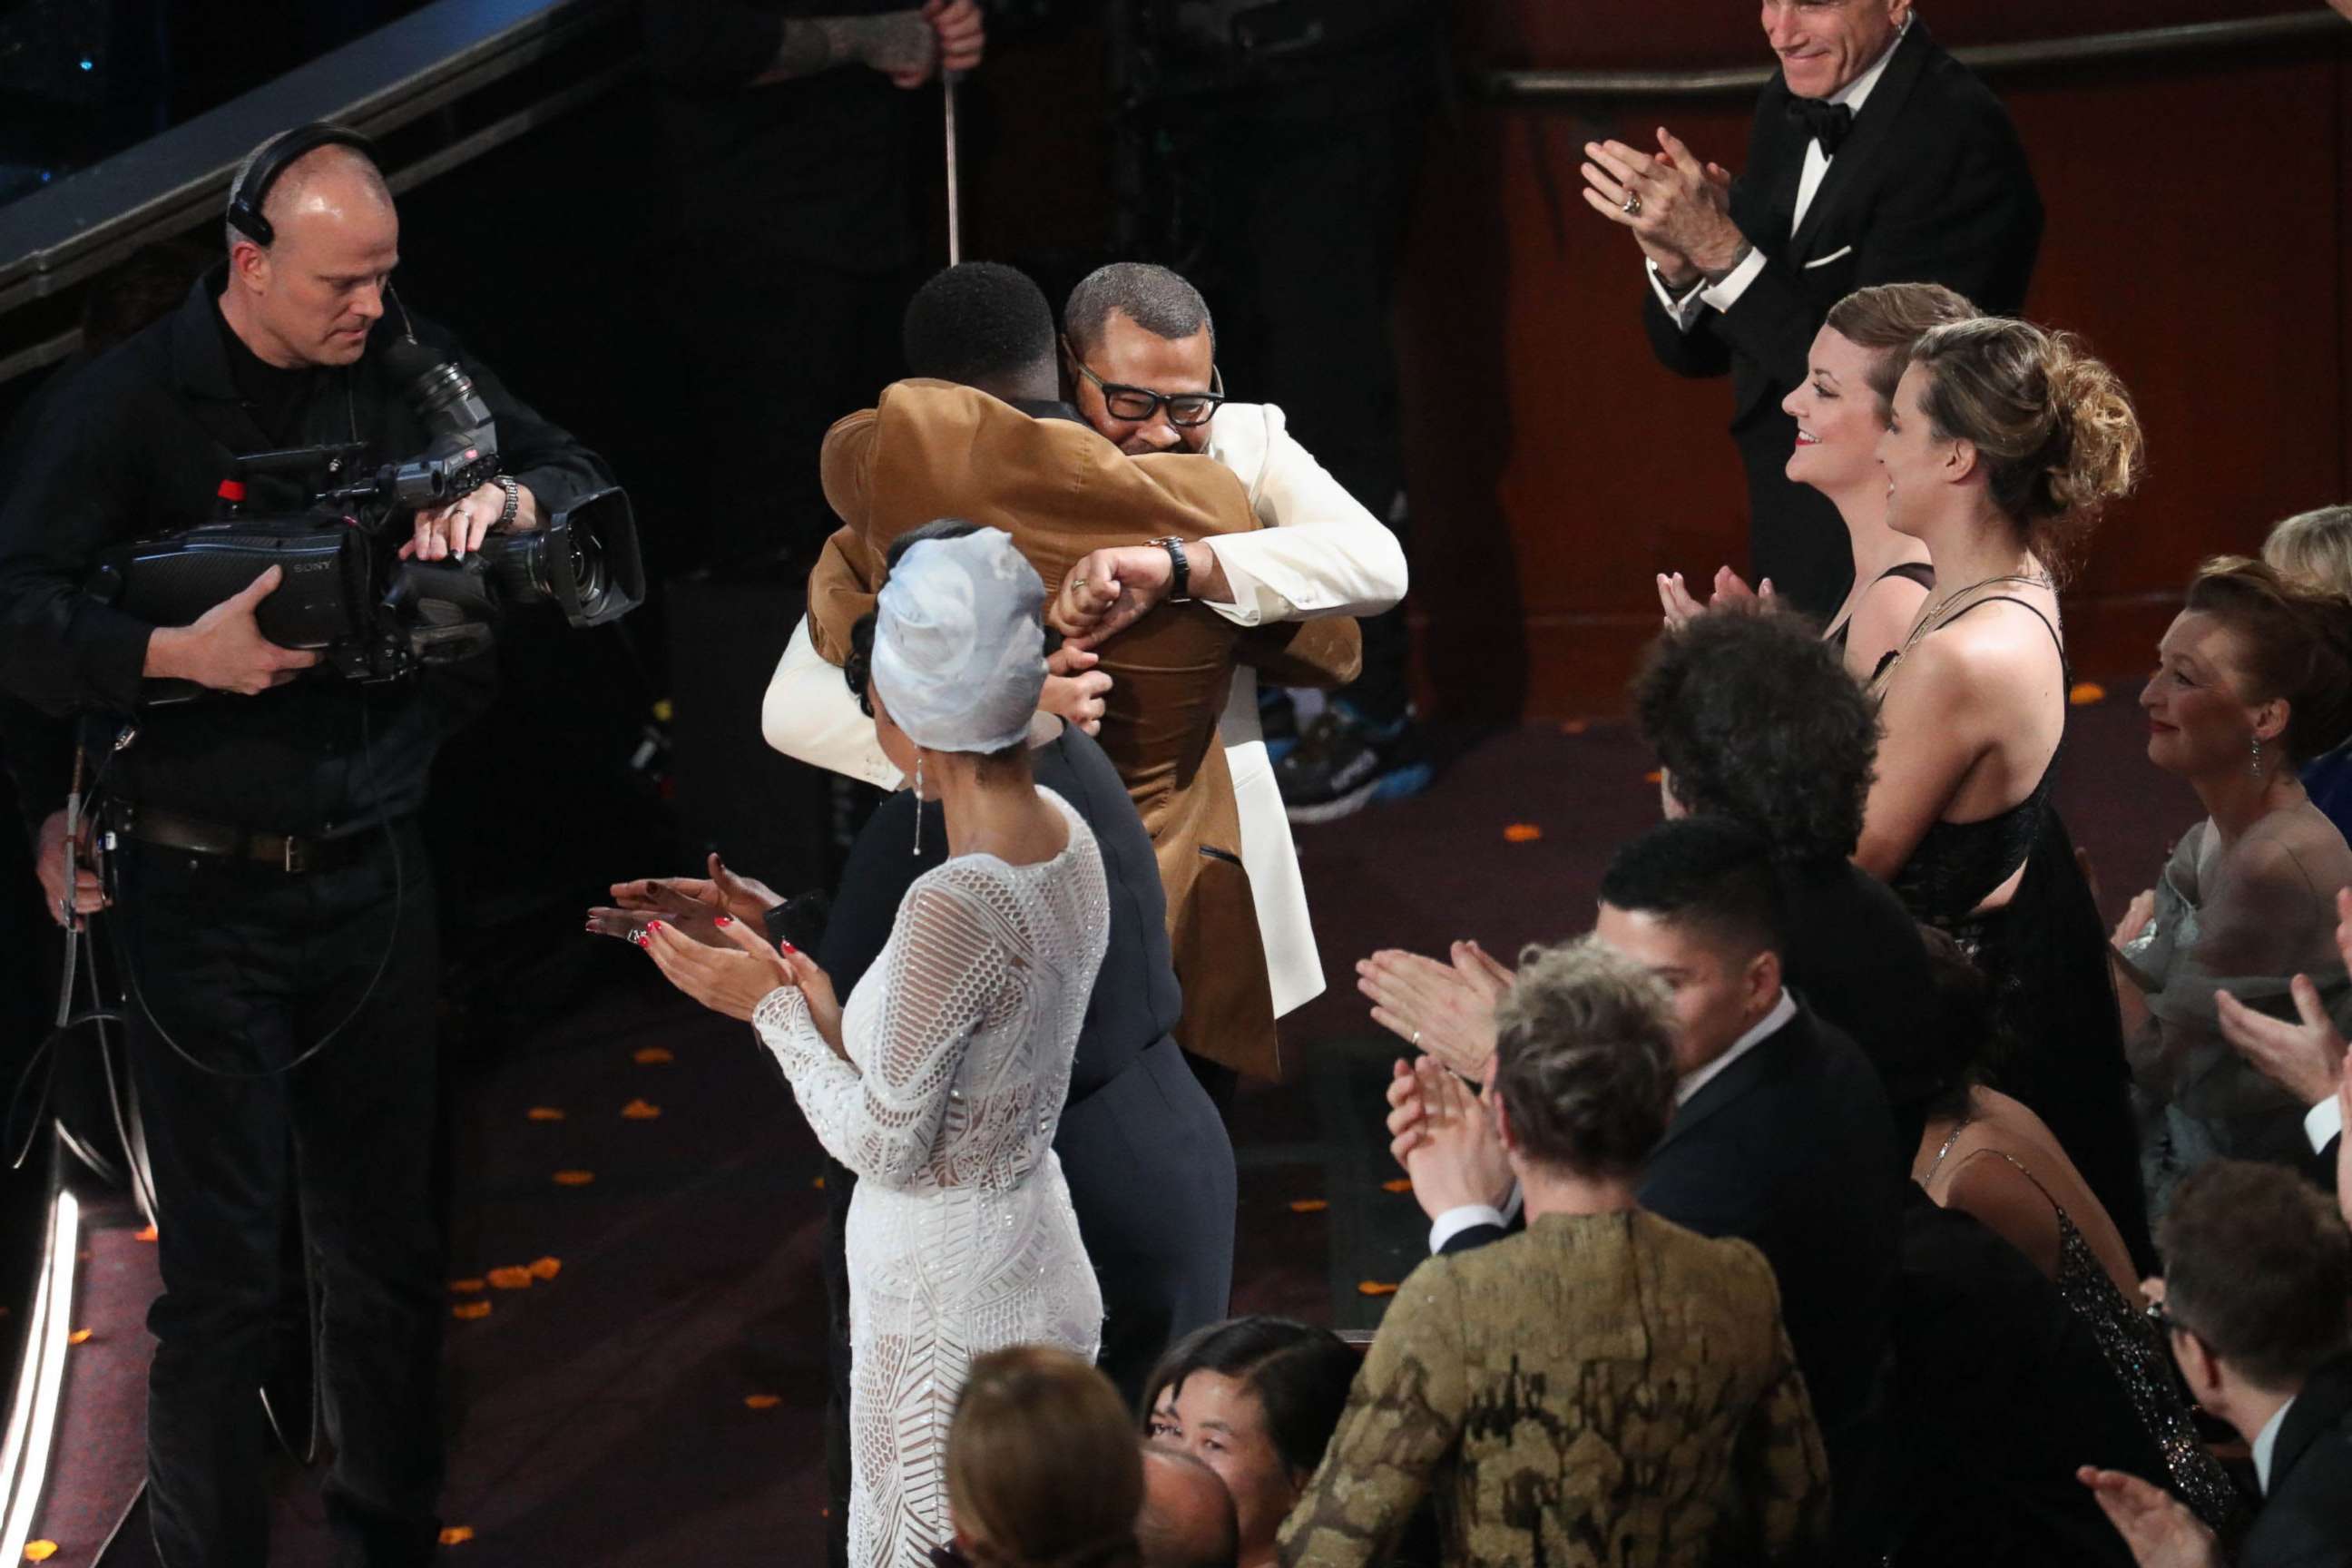 PHOTO: Jordan Peele hugs Daniel Kaluuya after winning the Oscar for best original screenplay for "Get Out" during the 90th Academy Awards at the Dolby Theater in Los Angeles, March 4, 2018.